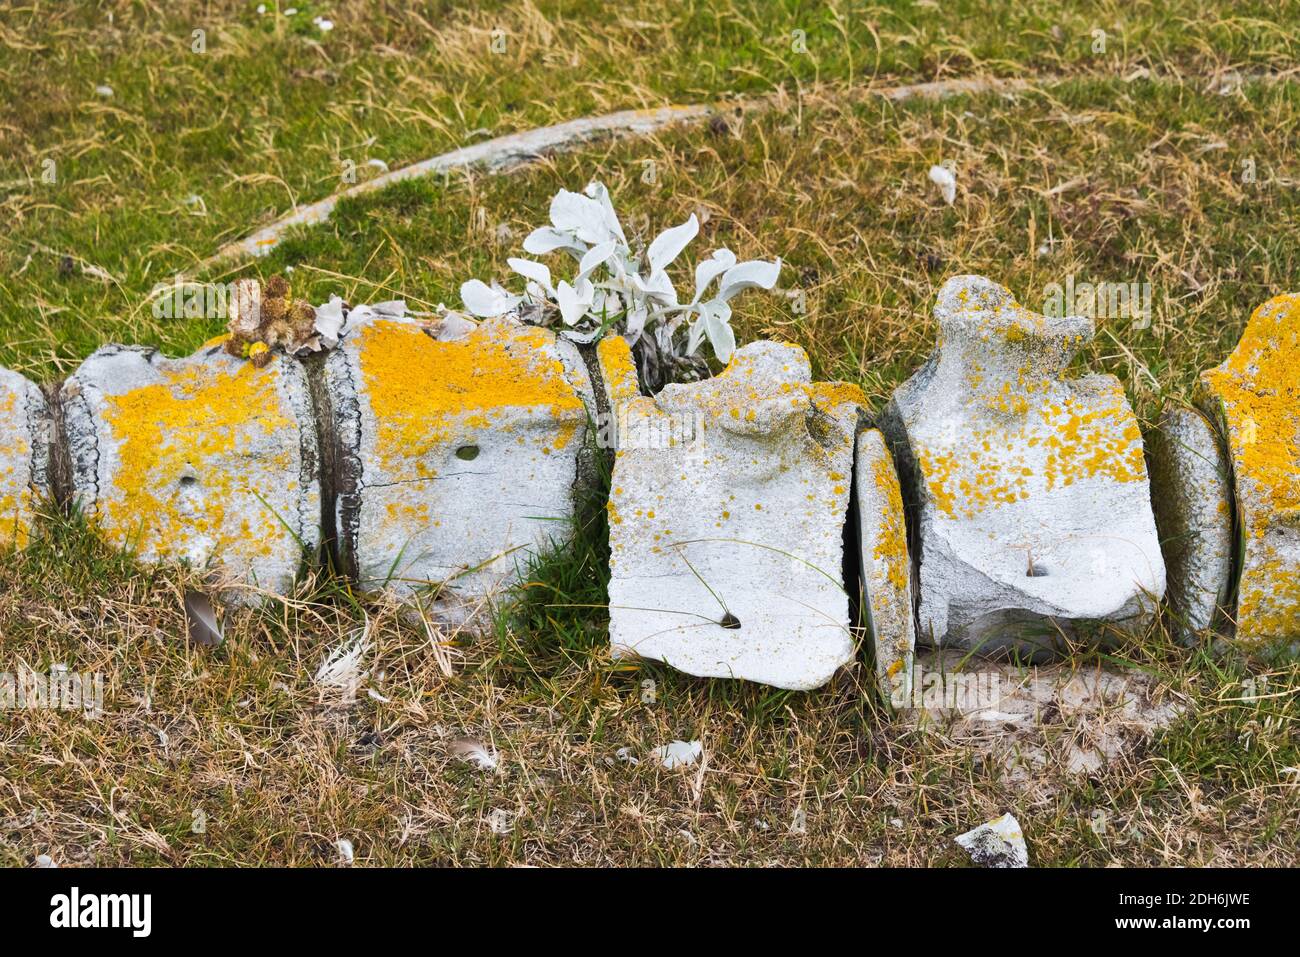 Spine disk of a whale skeleton, Saunders Island, Falkland Islands Stock Photo